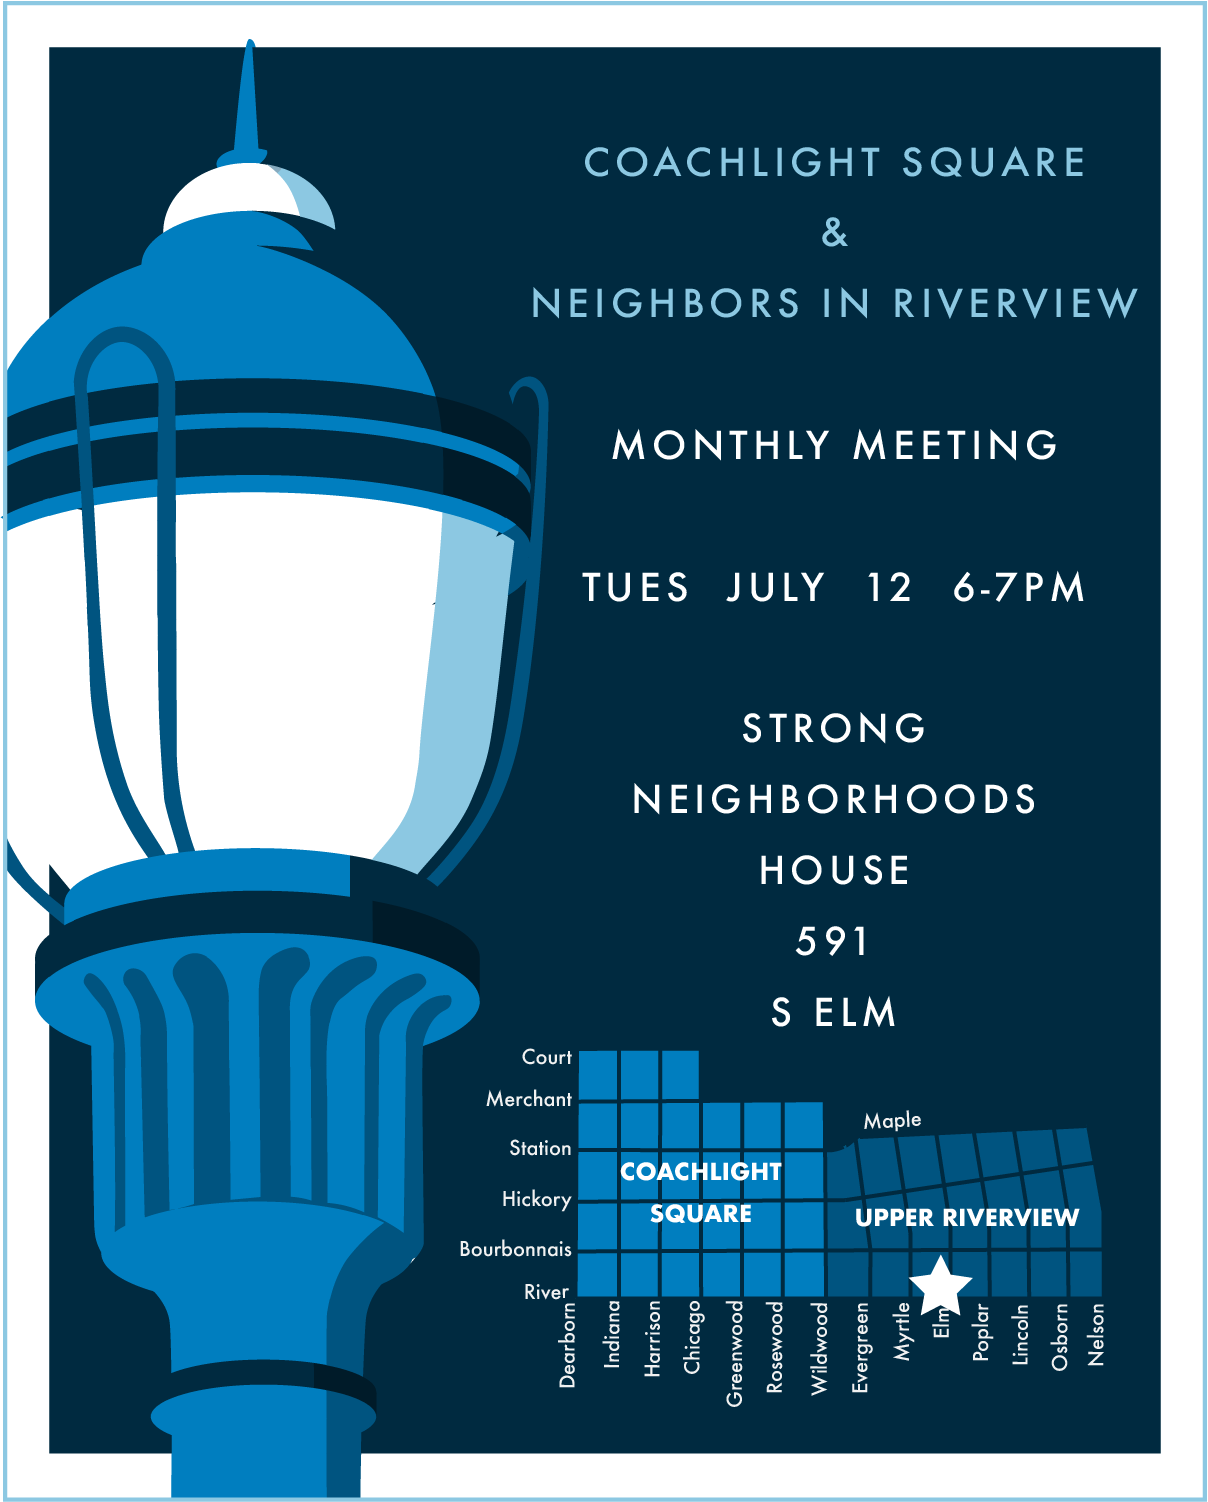 Coachlight Square/Neighbors in Riverview - July Meeting